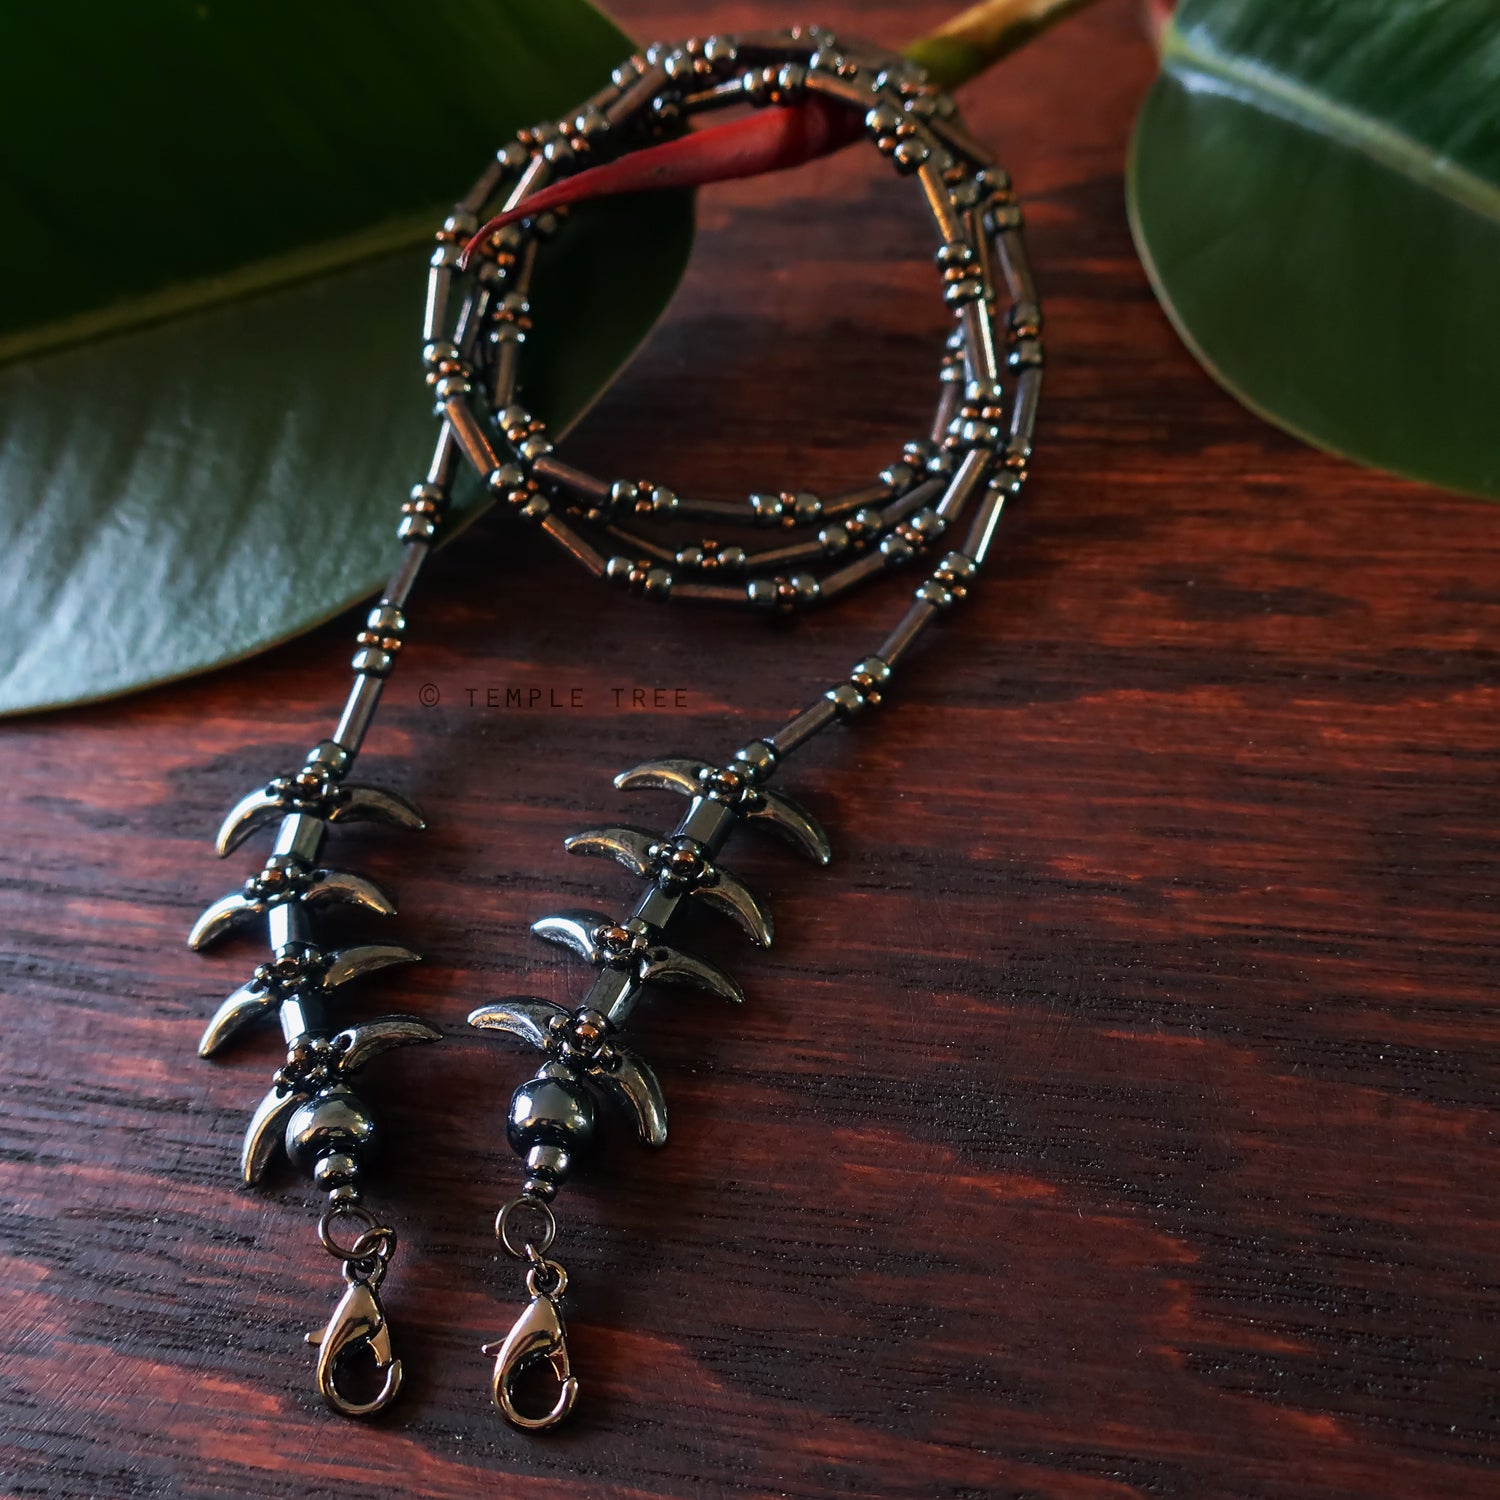 Temple Vine Beadwoven Mask Lanyard by Temple Tree - Grey and Bronze